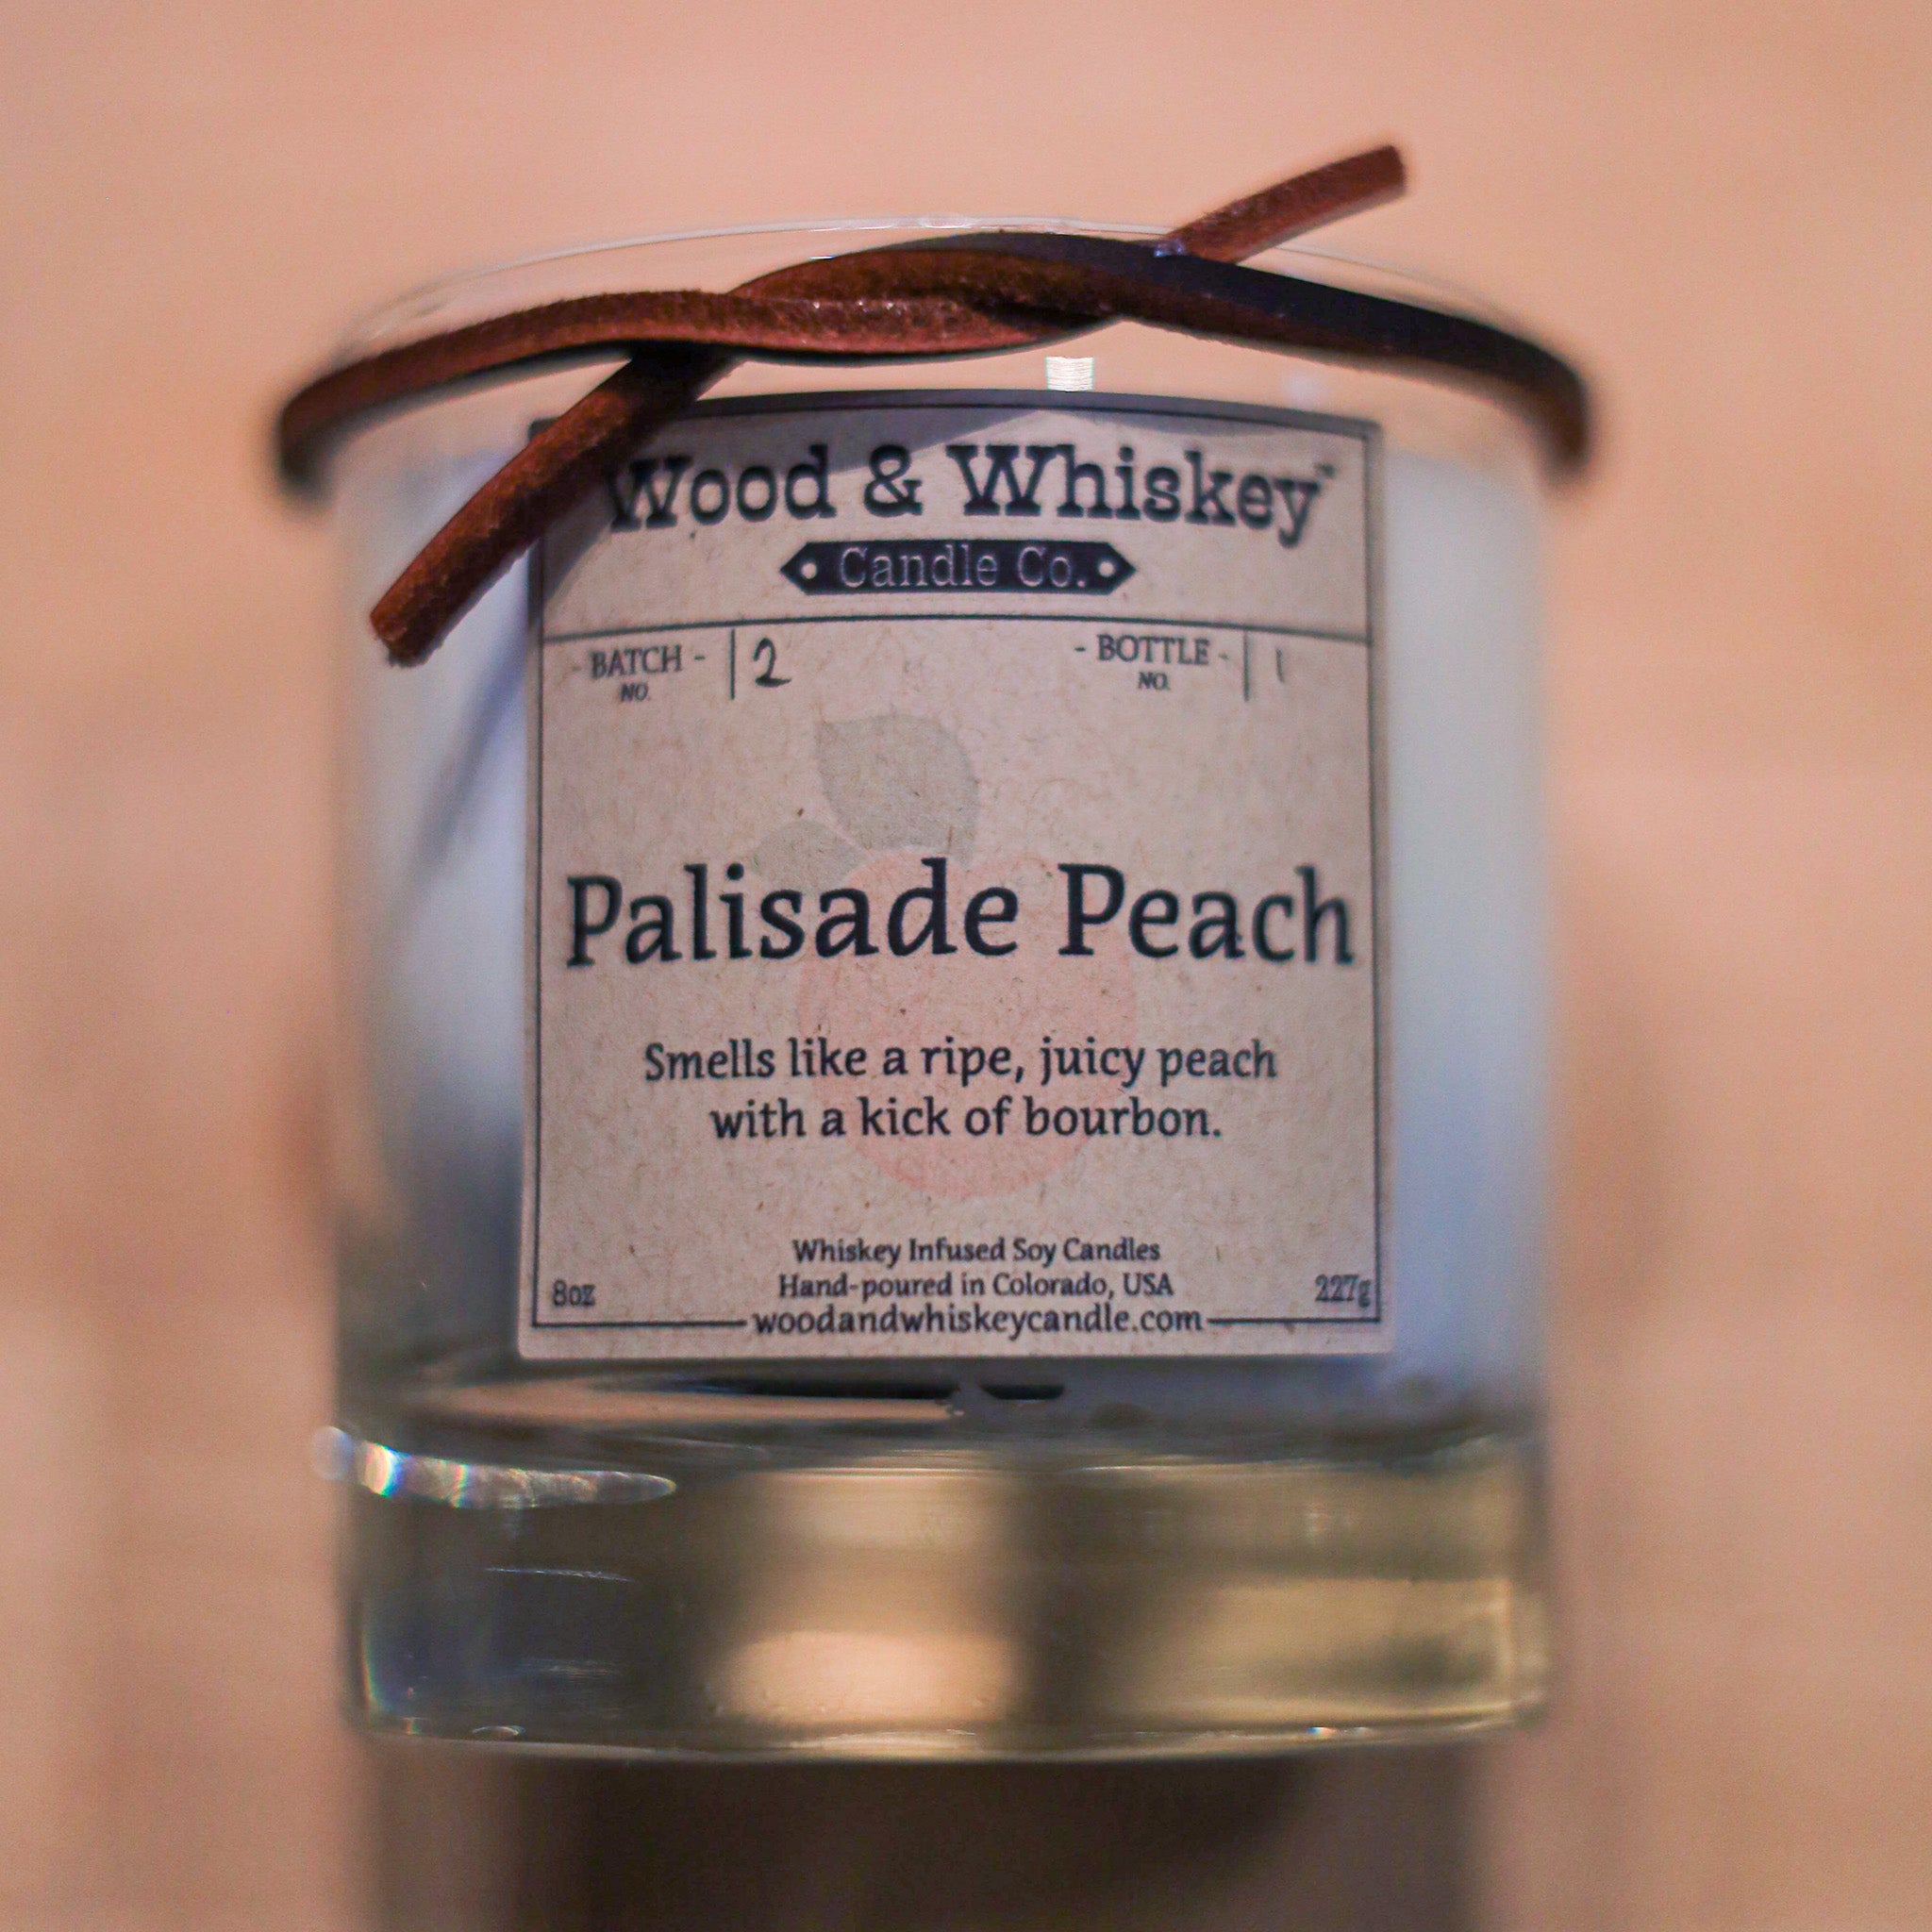 Peach whiskey candle - Crown Peach Bottle - soy wax - DECONSTRUCTED CA –  Deconstructed Candles